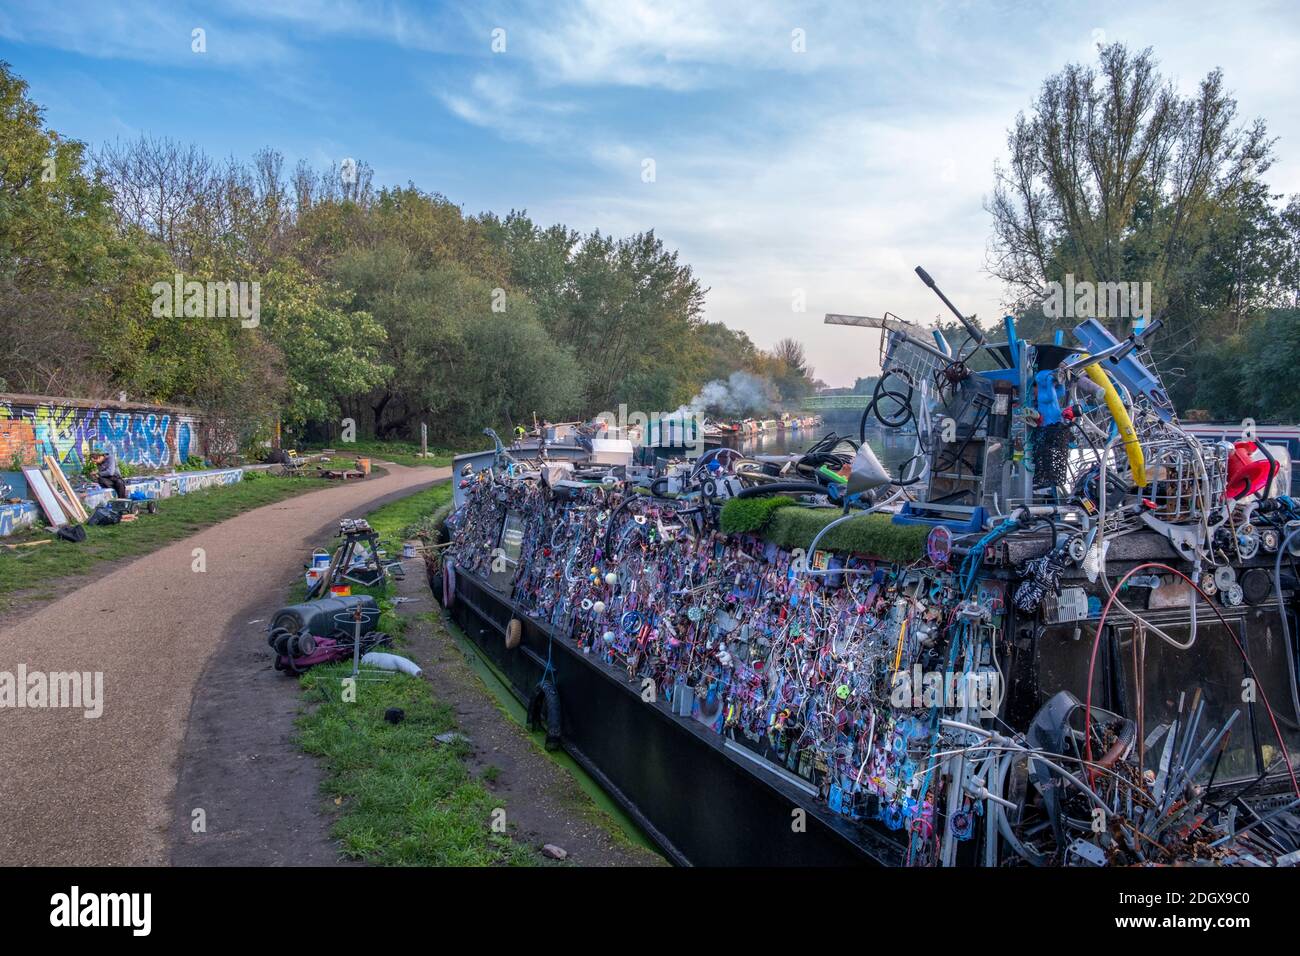 Colourful houseboat covered in local art, hackney, Lea Valley, East London, UK Stock Photo